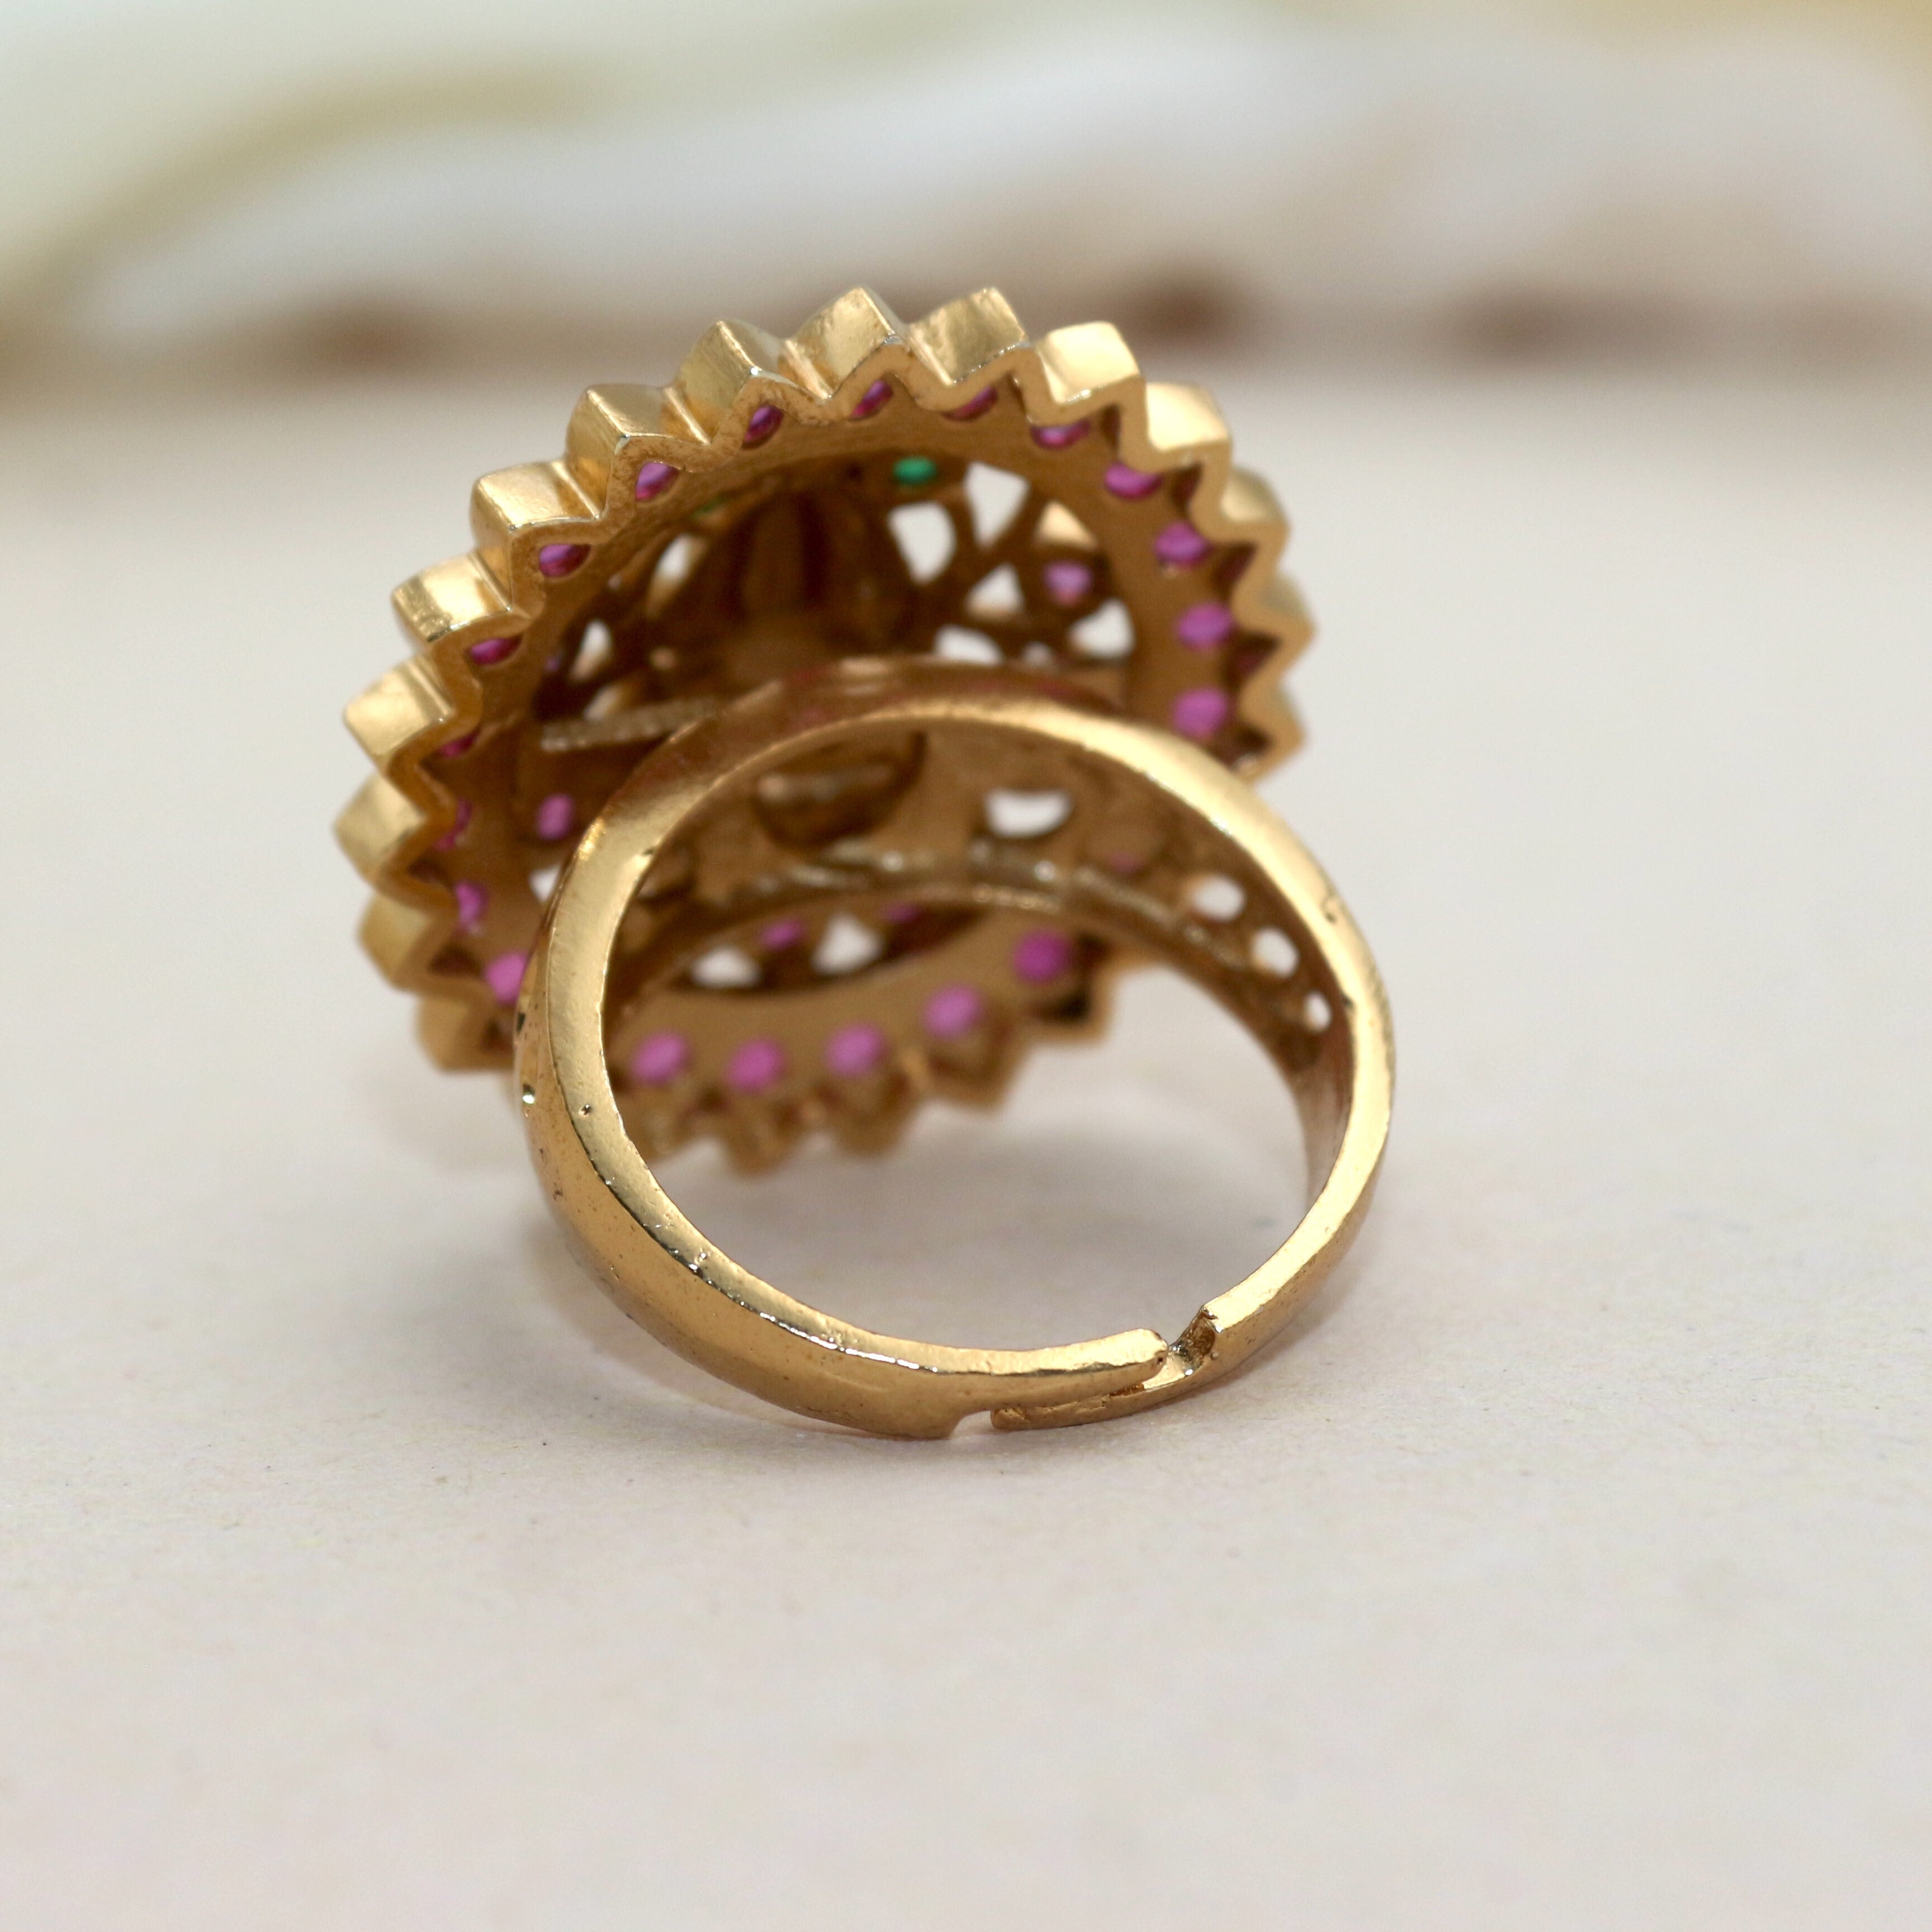 Gold ring | Antique gold rings, Gold rings jewelry, Wedding accessories  jewelry